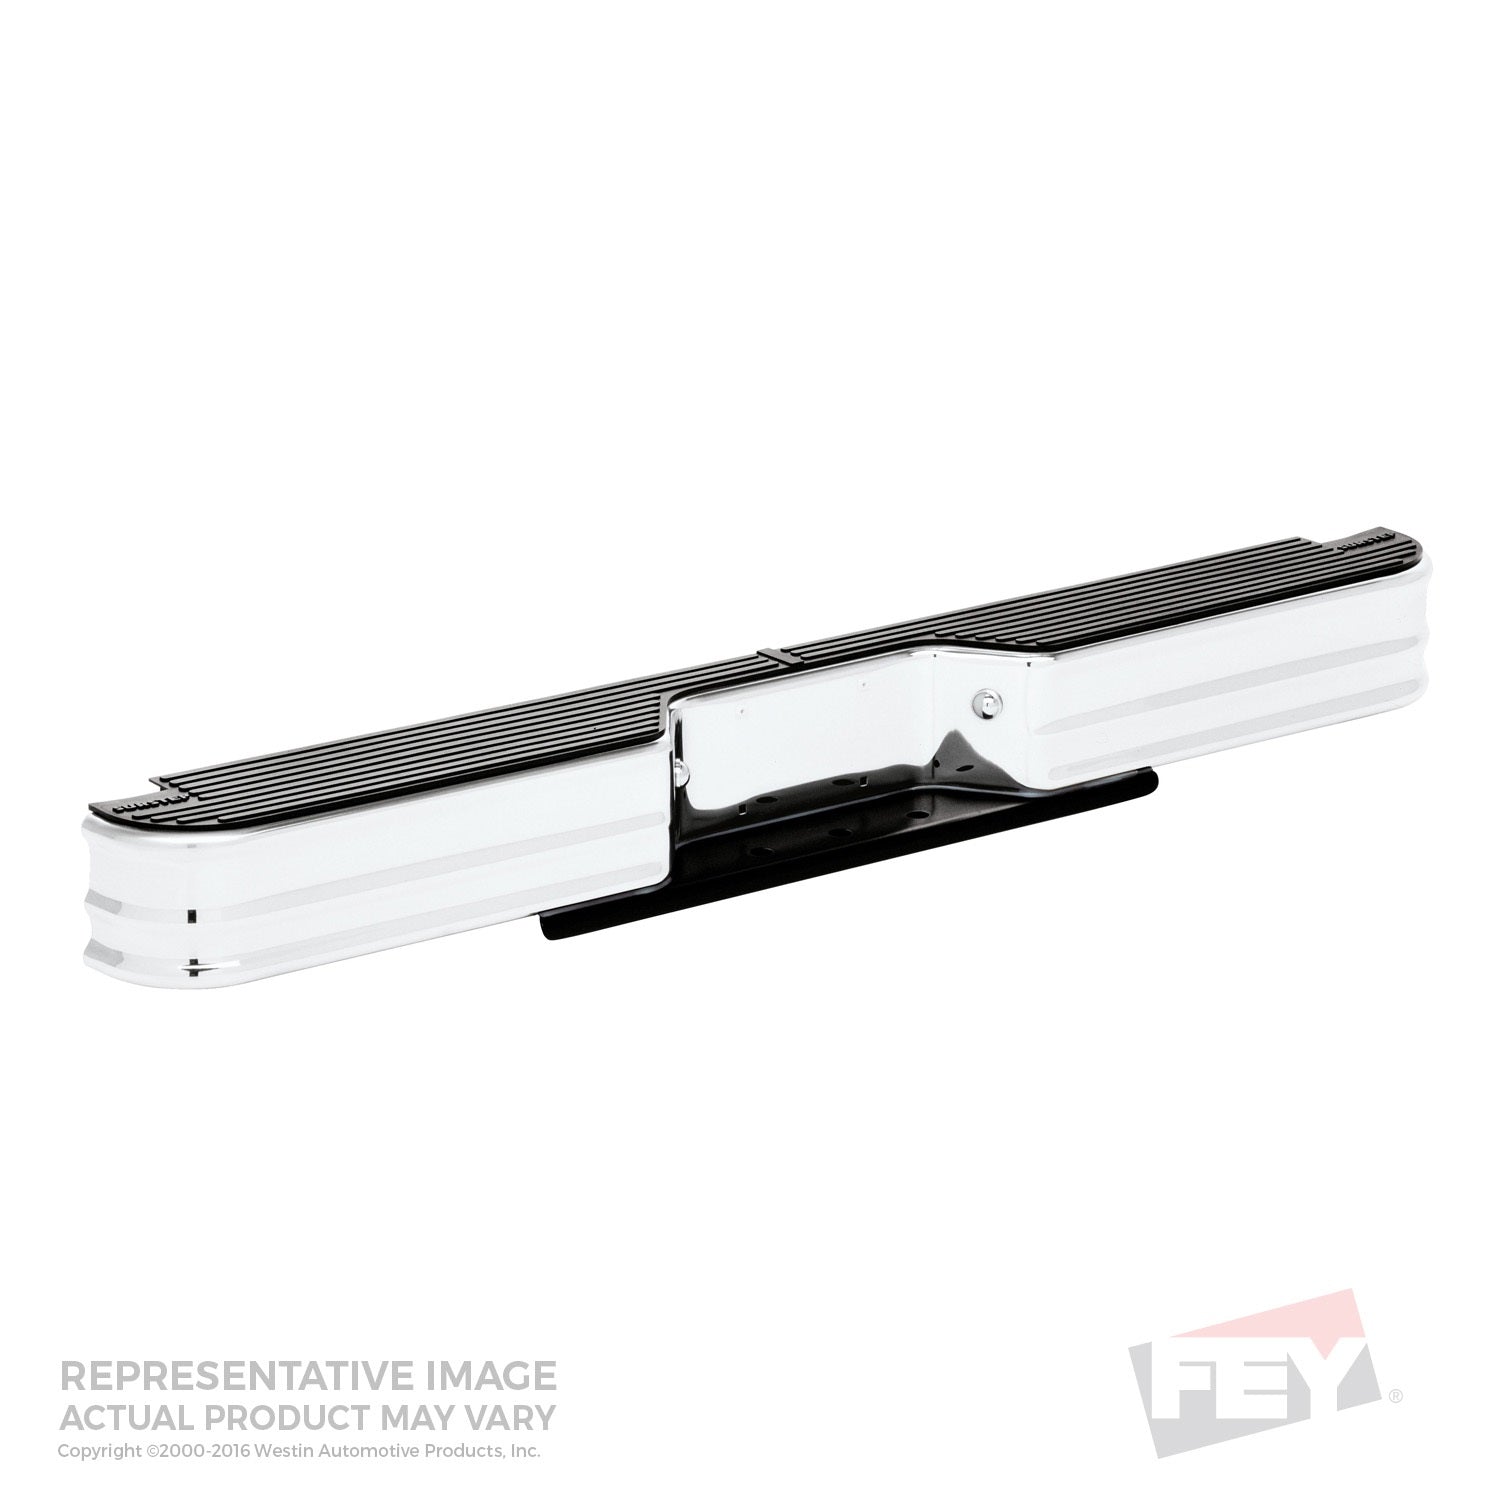 Surestep universal compact bumper chmrequires separate mount kit purchase